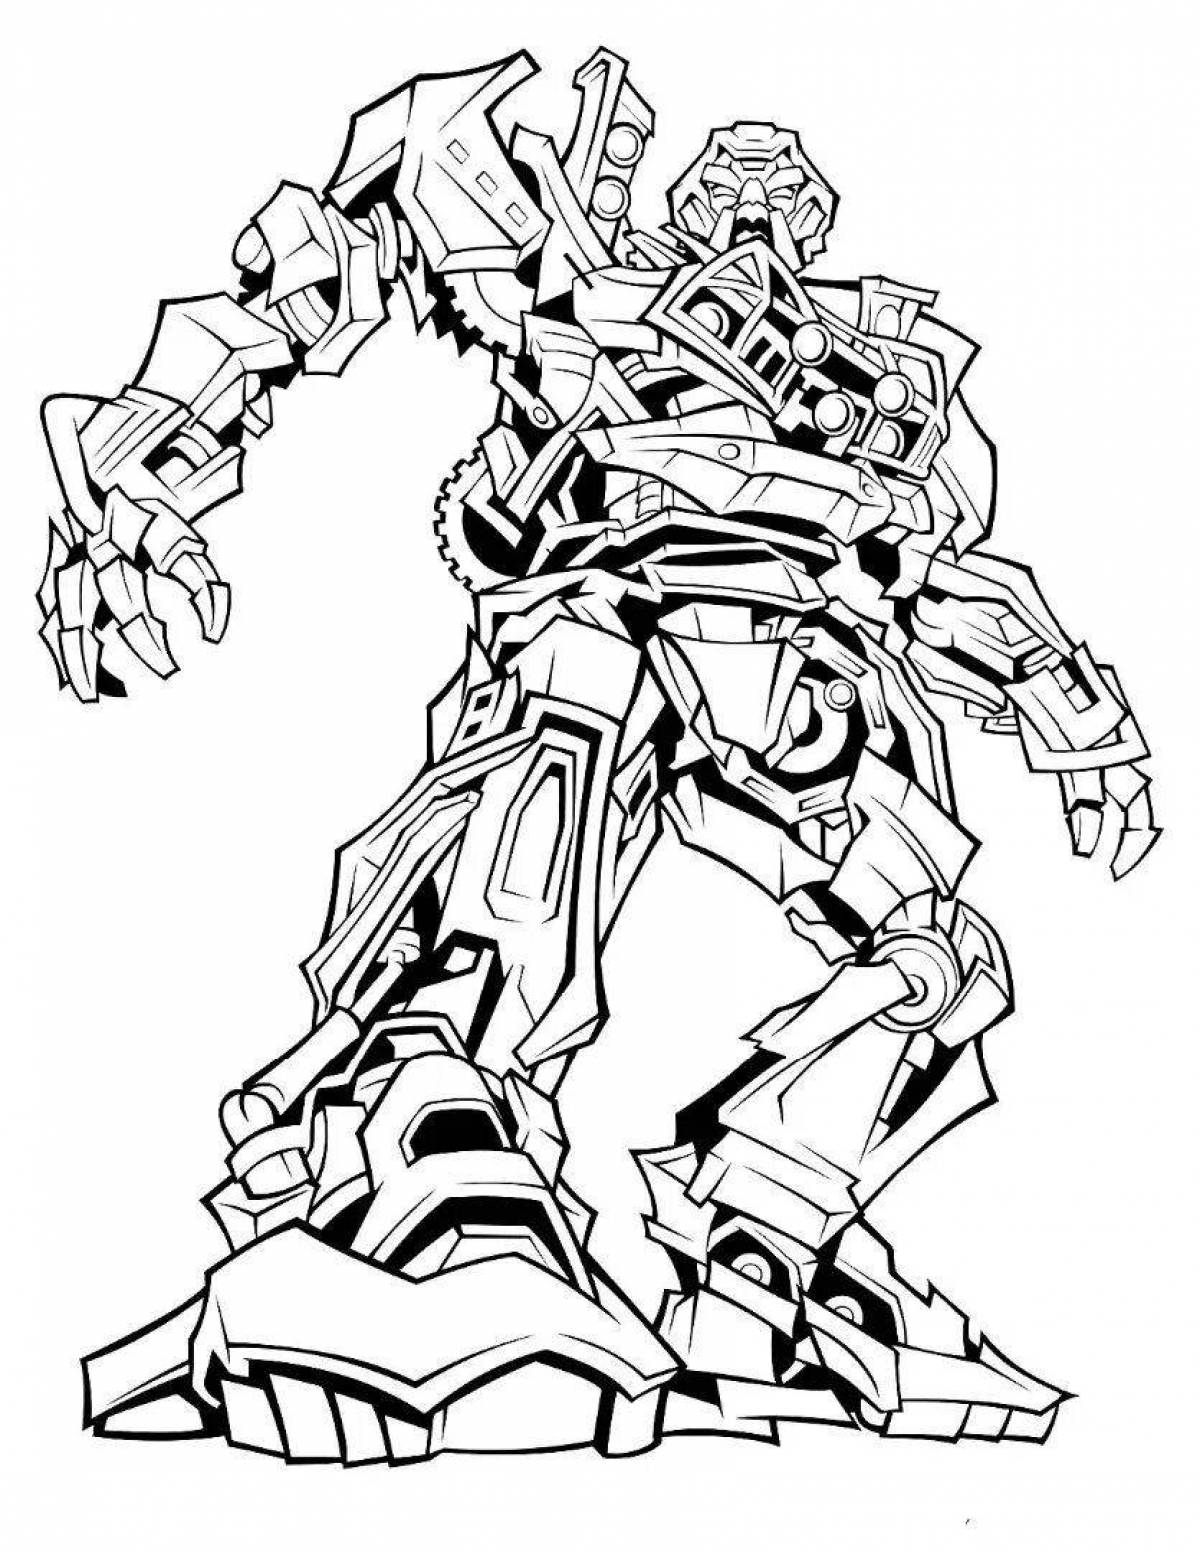 Majestic barricade coloring page